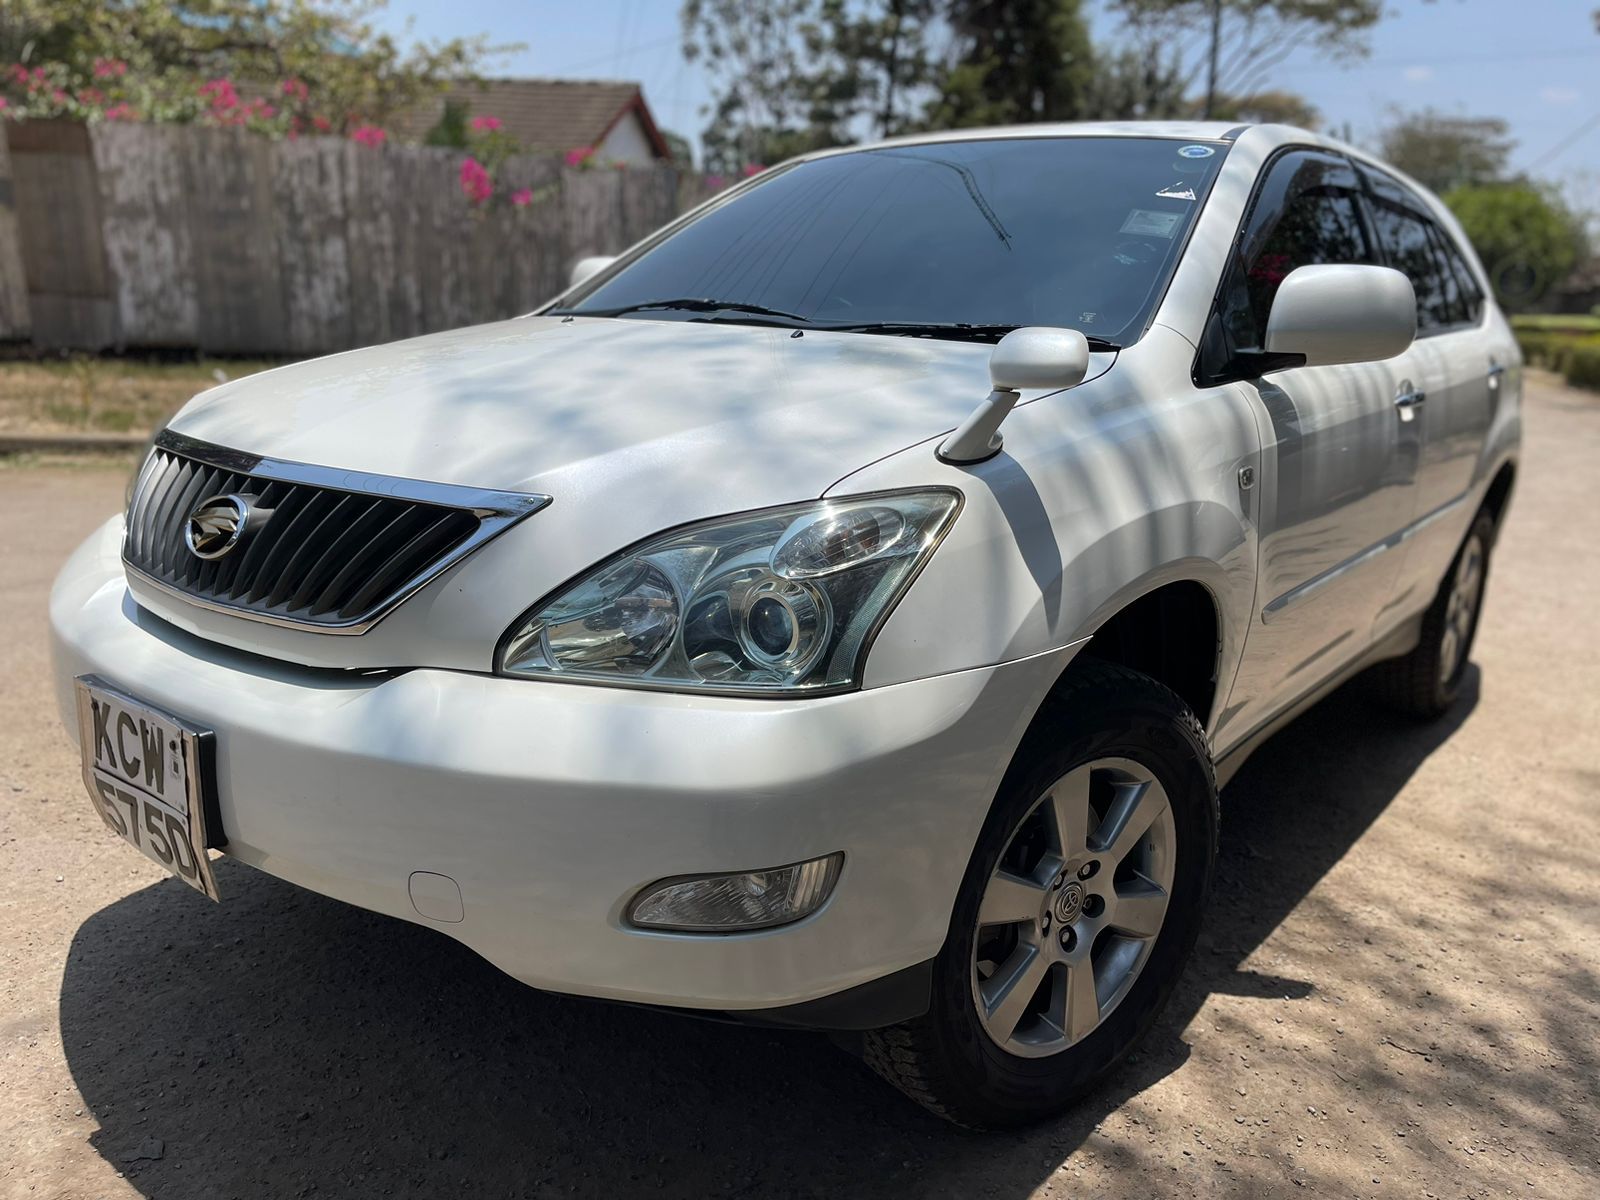 Toyota Harrier 2013 You Pay 30% Deposit Trade in OK Wow